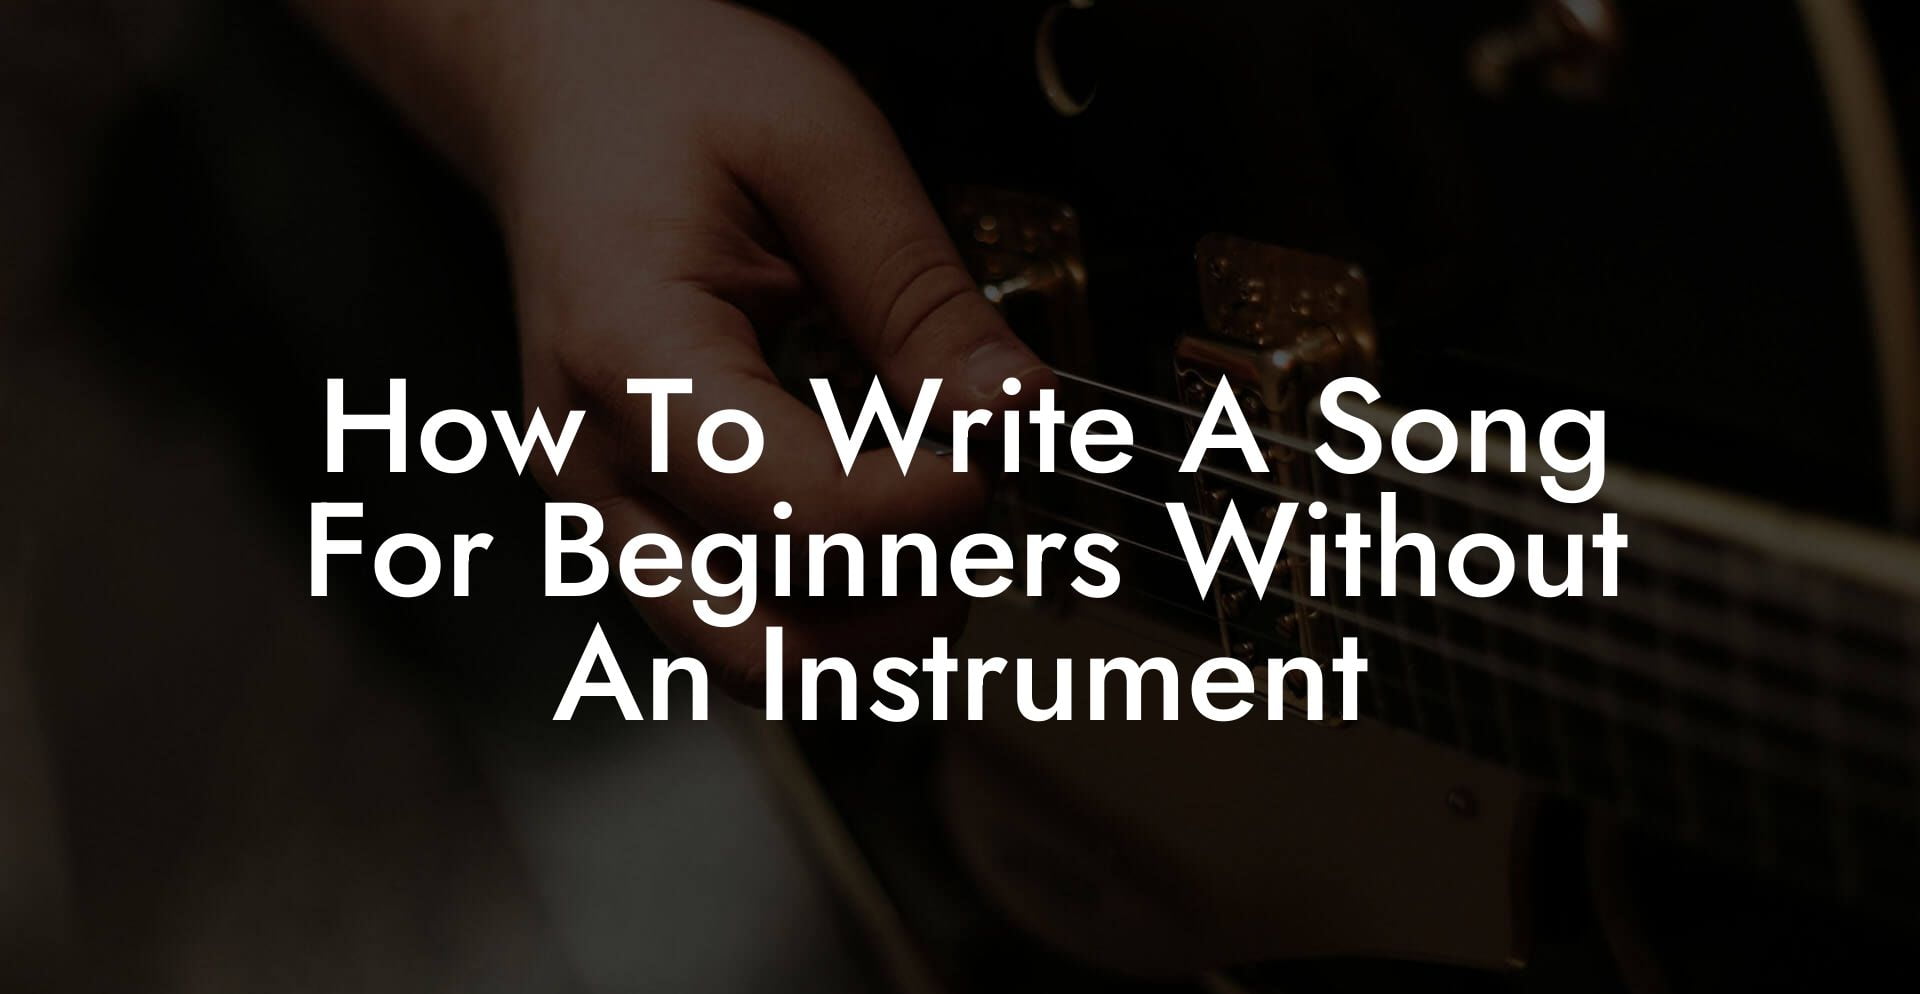 how to write a song for beginners without an instrument lyric assistant